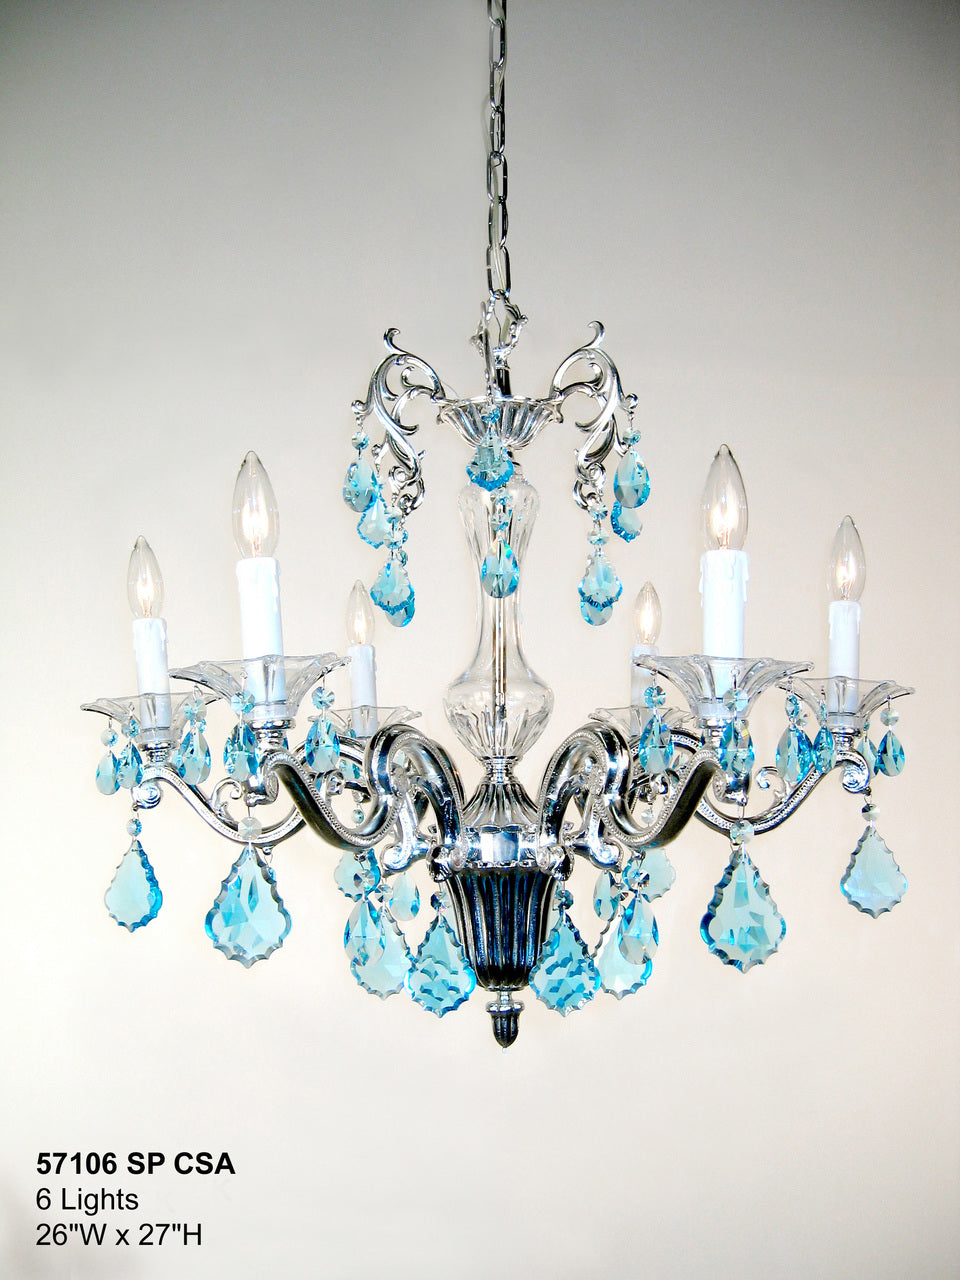 Classic Lighting 57106 SP IRA Via Firenze Crystal Chandelier in Silver (Imported from Spain)